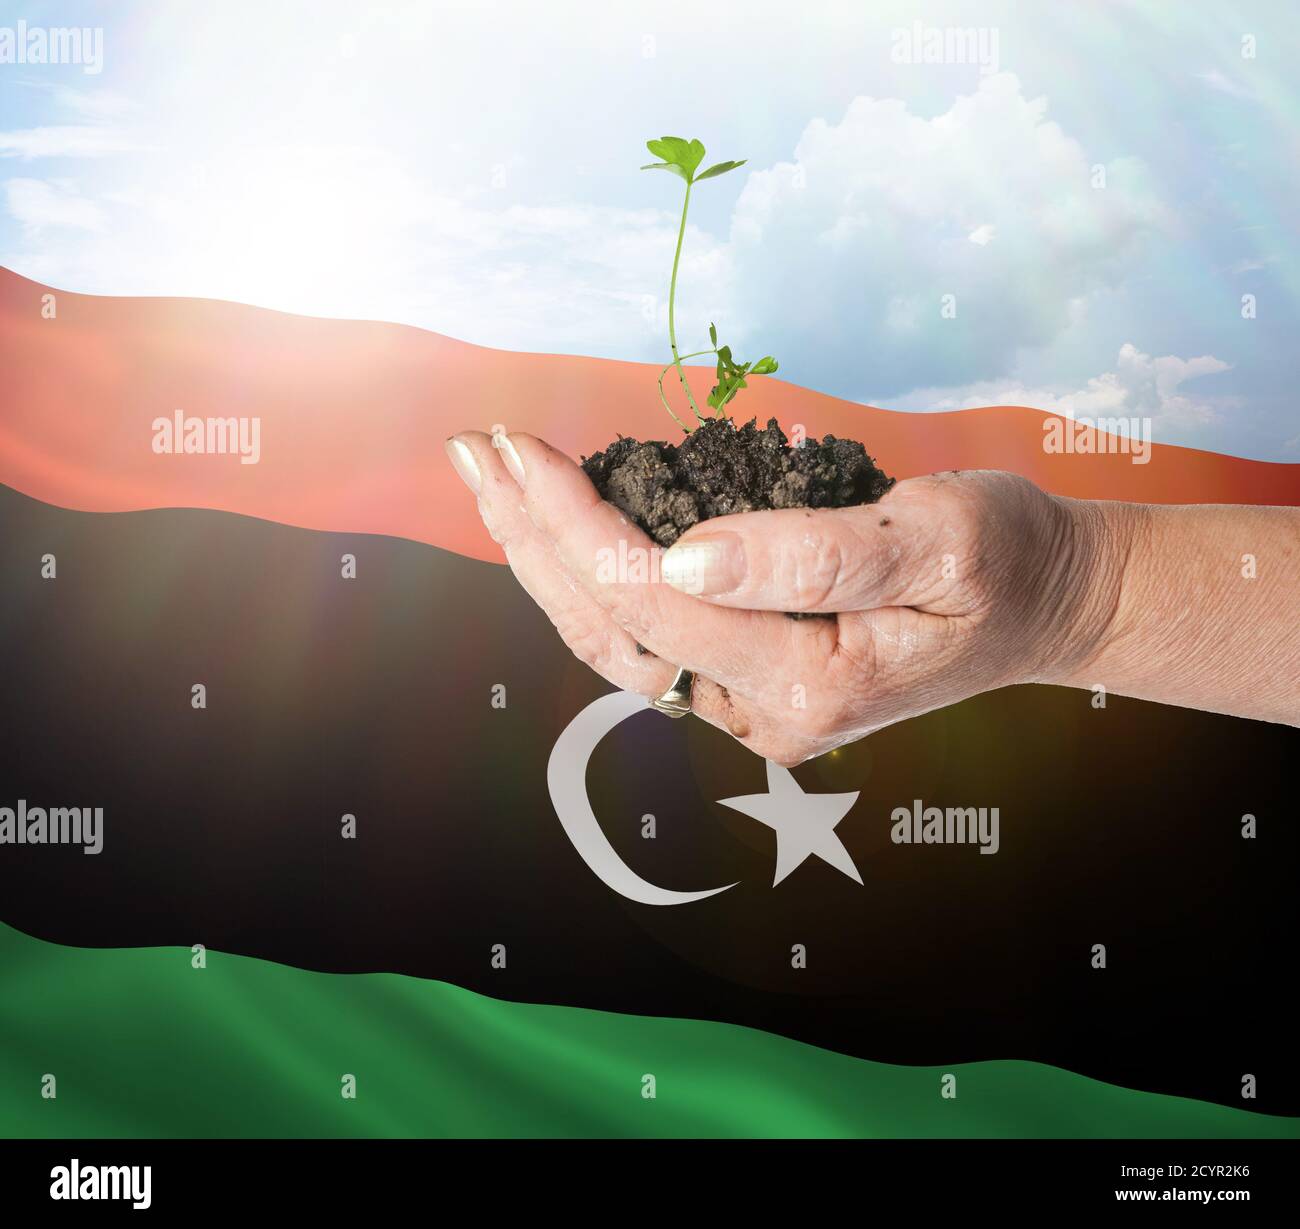 Libya growth and new beginning. Green renewable energy and ecology concept. Hand holding young plant. Stock Photo